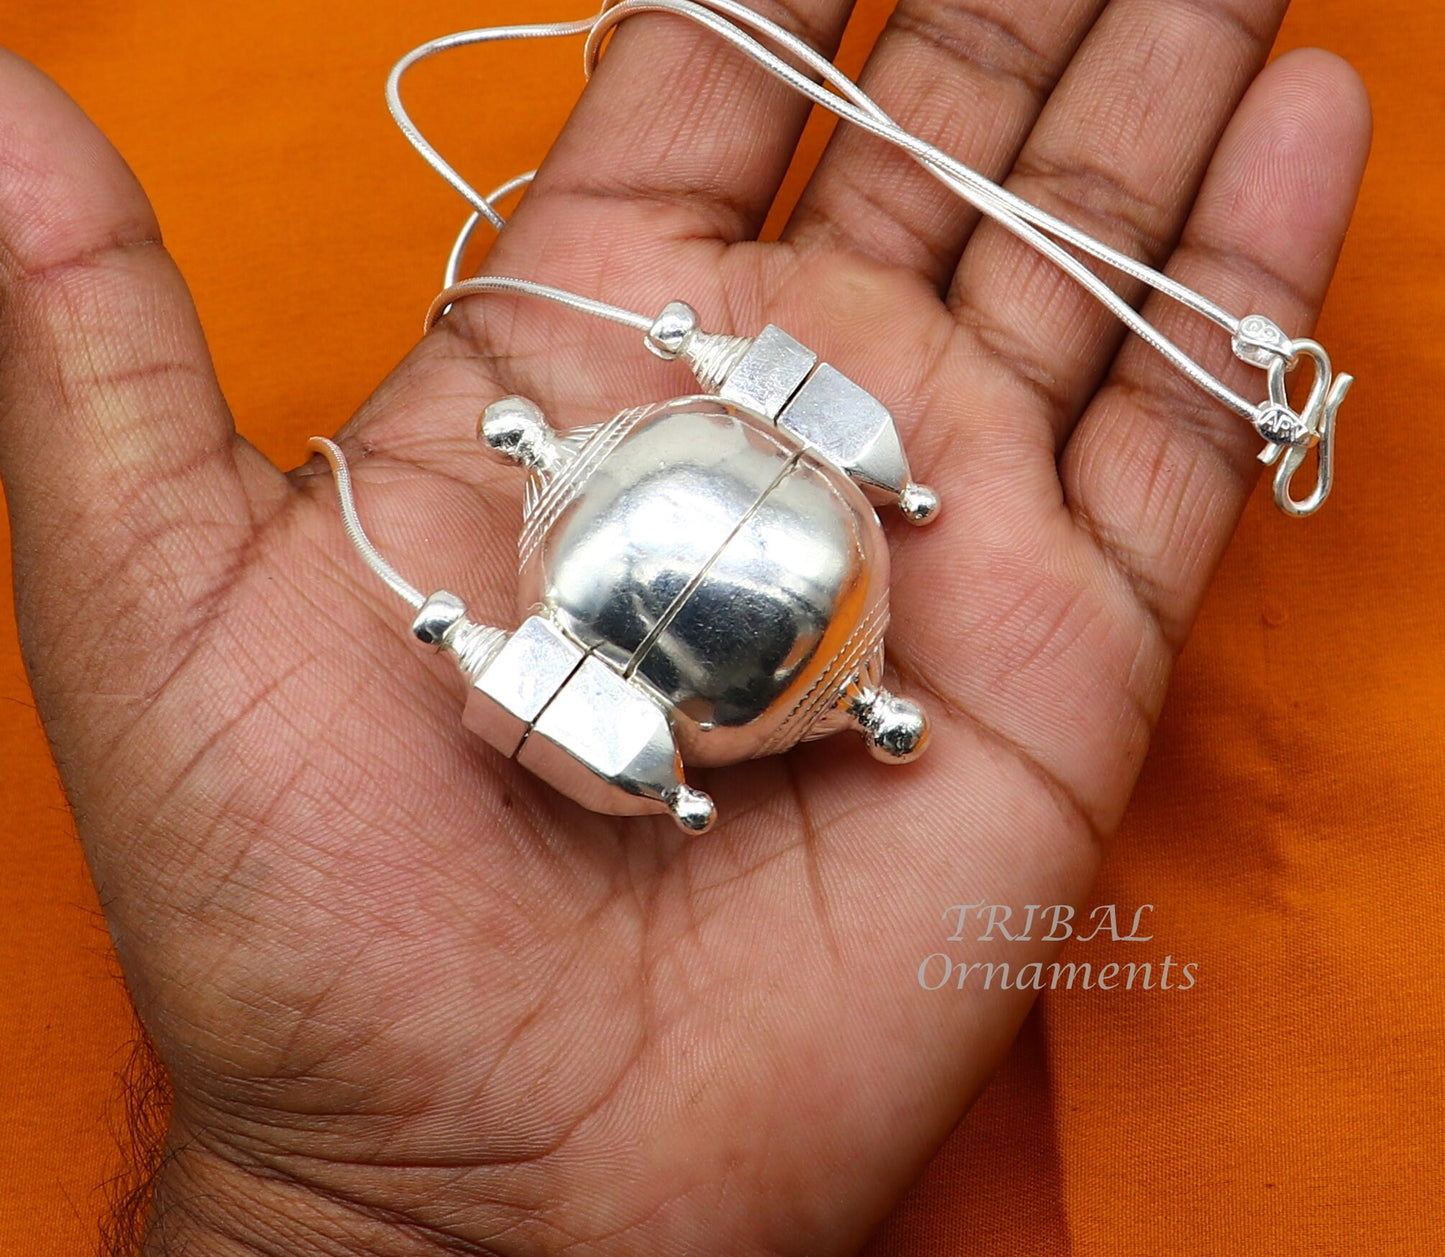 Sterling silver handmade solid silver chain and Shiva lingam box, box pendant necklace set, container pendant tribal jewelry india set489 - TRIBAL ORNAMENTS